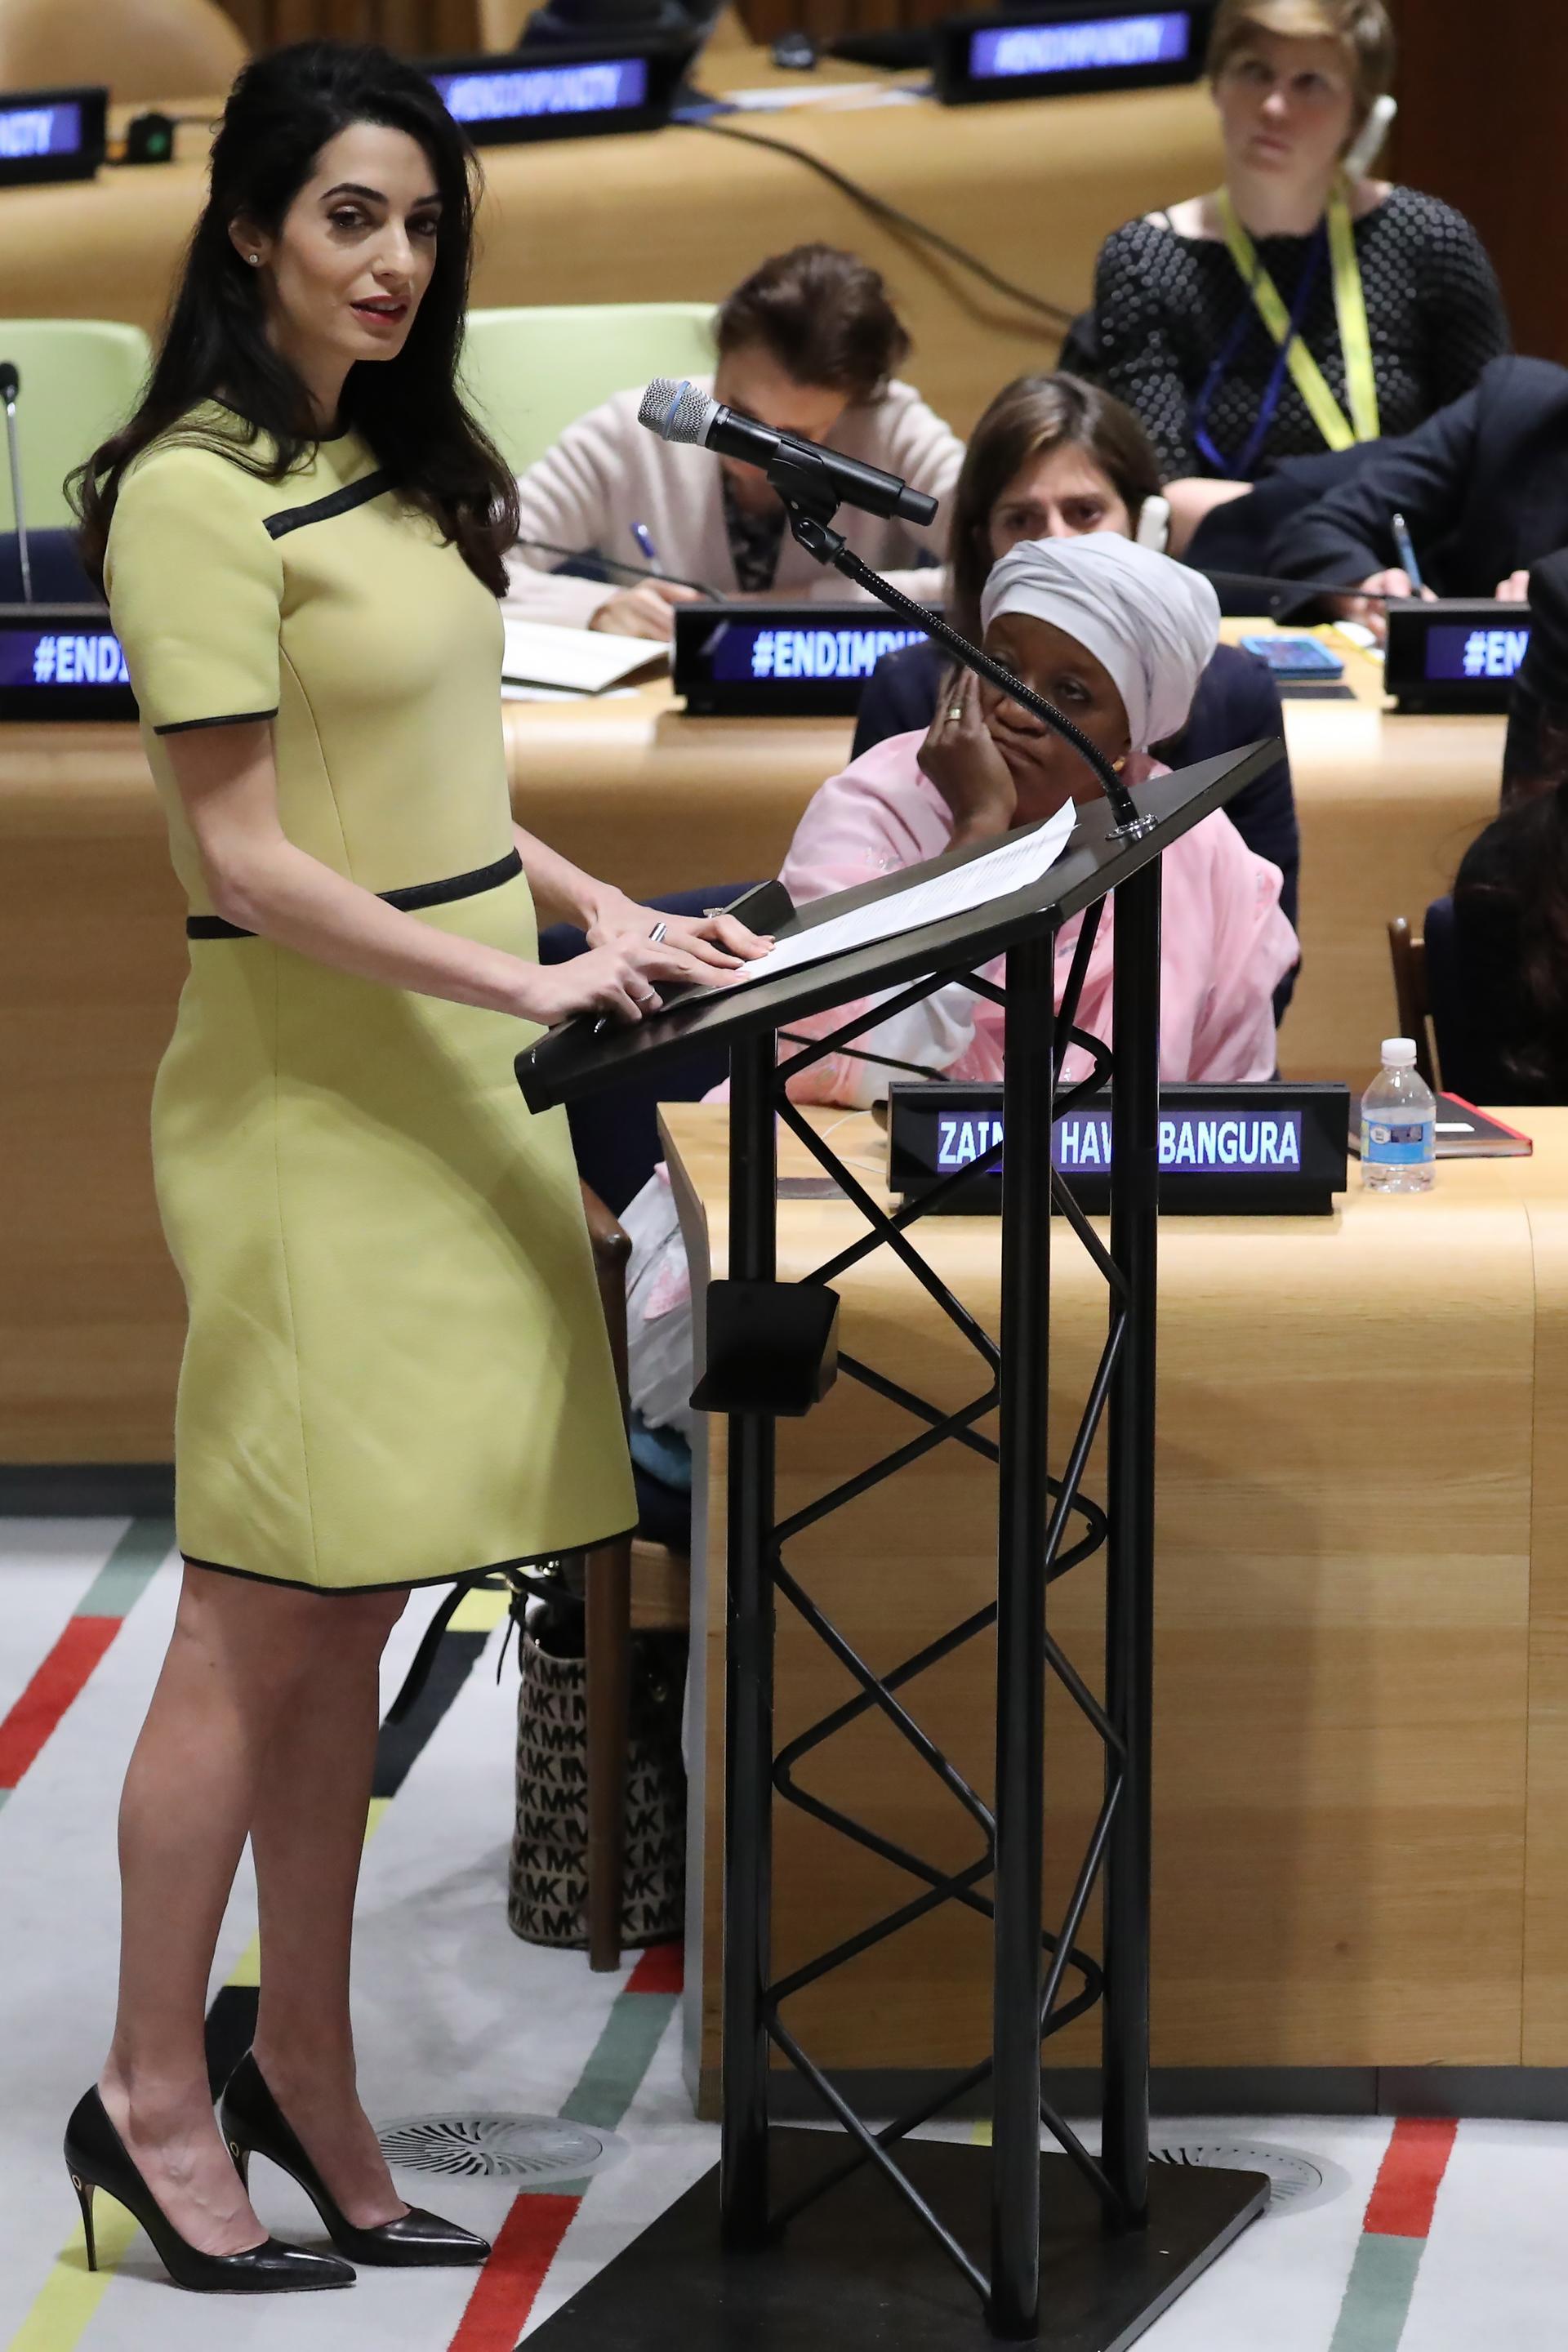 Courtroom to red carpet: 27 photos that show Amal Clooney's style